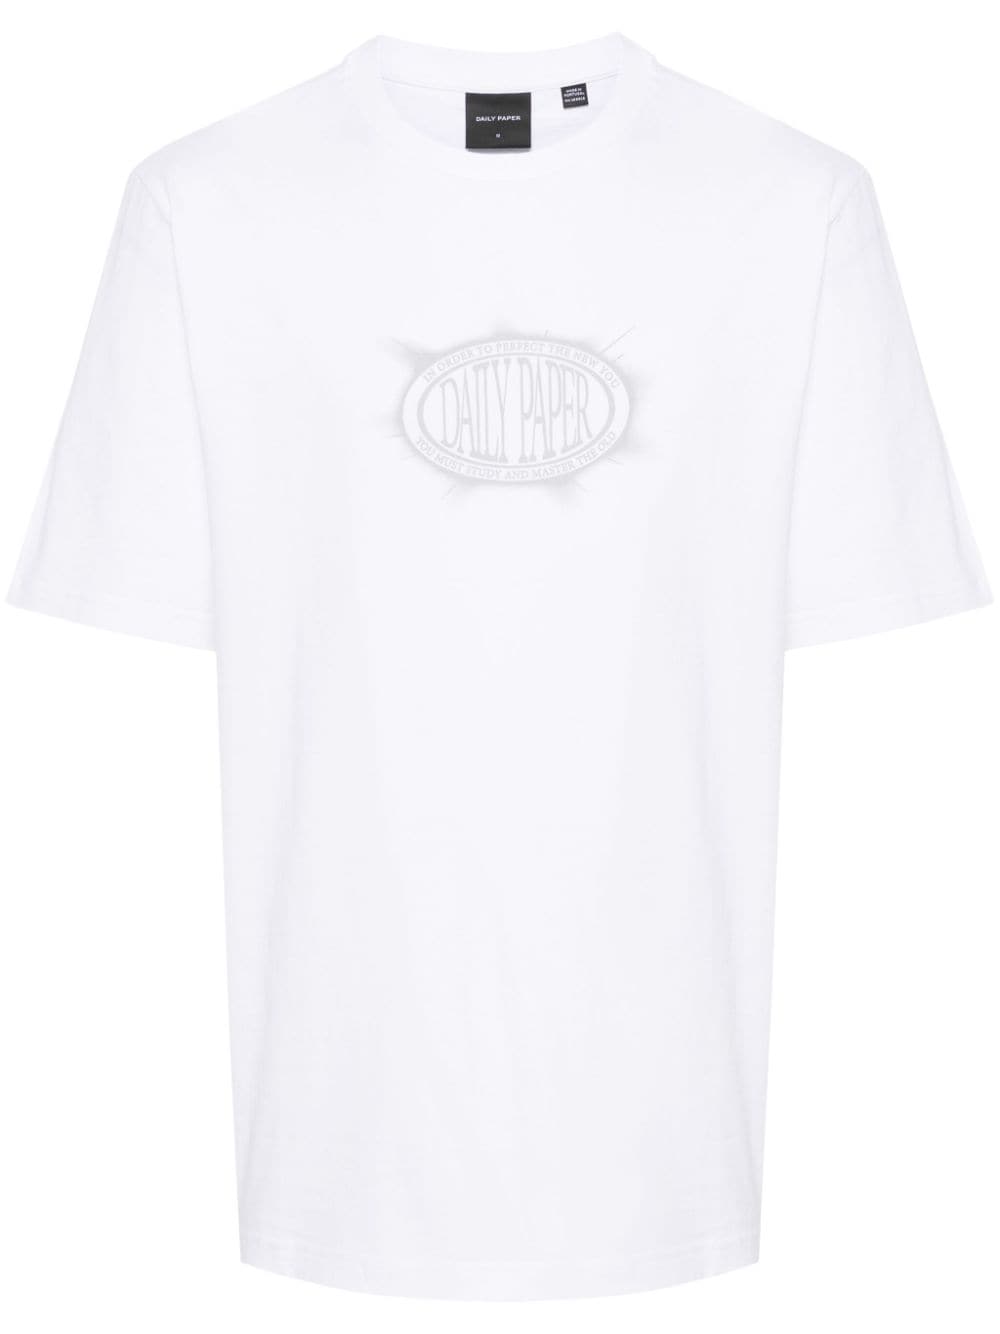 Daily Paper Glow cotton T-shirt - White von Daily Paper